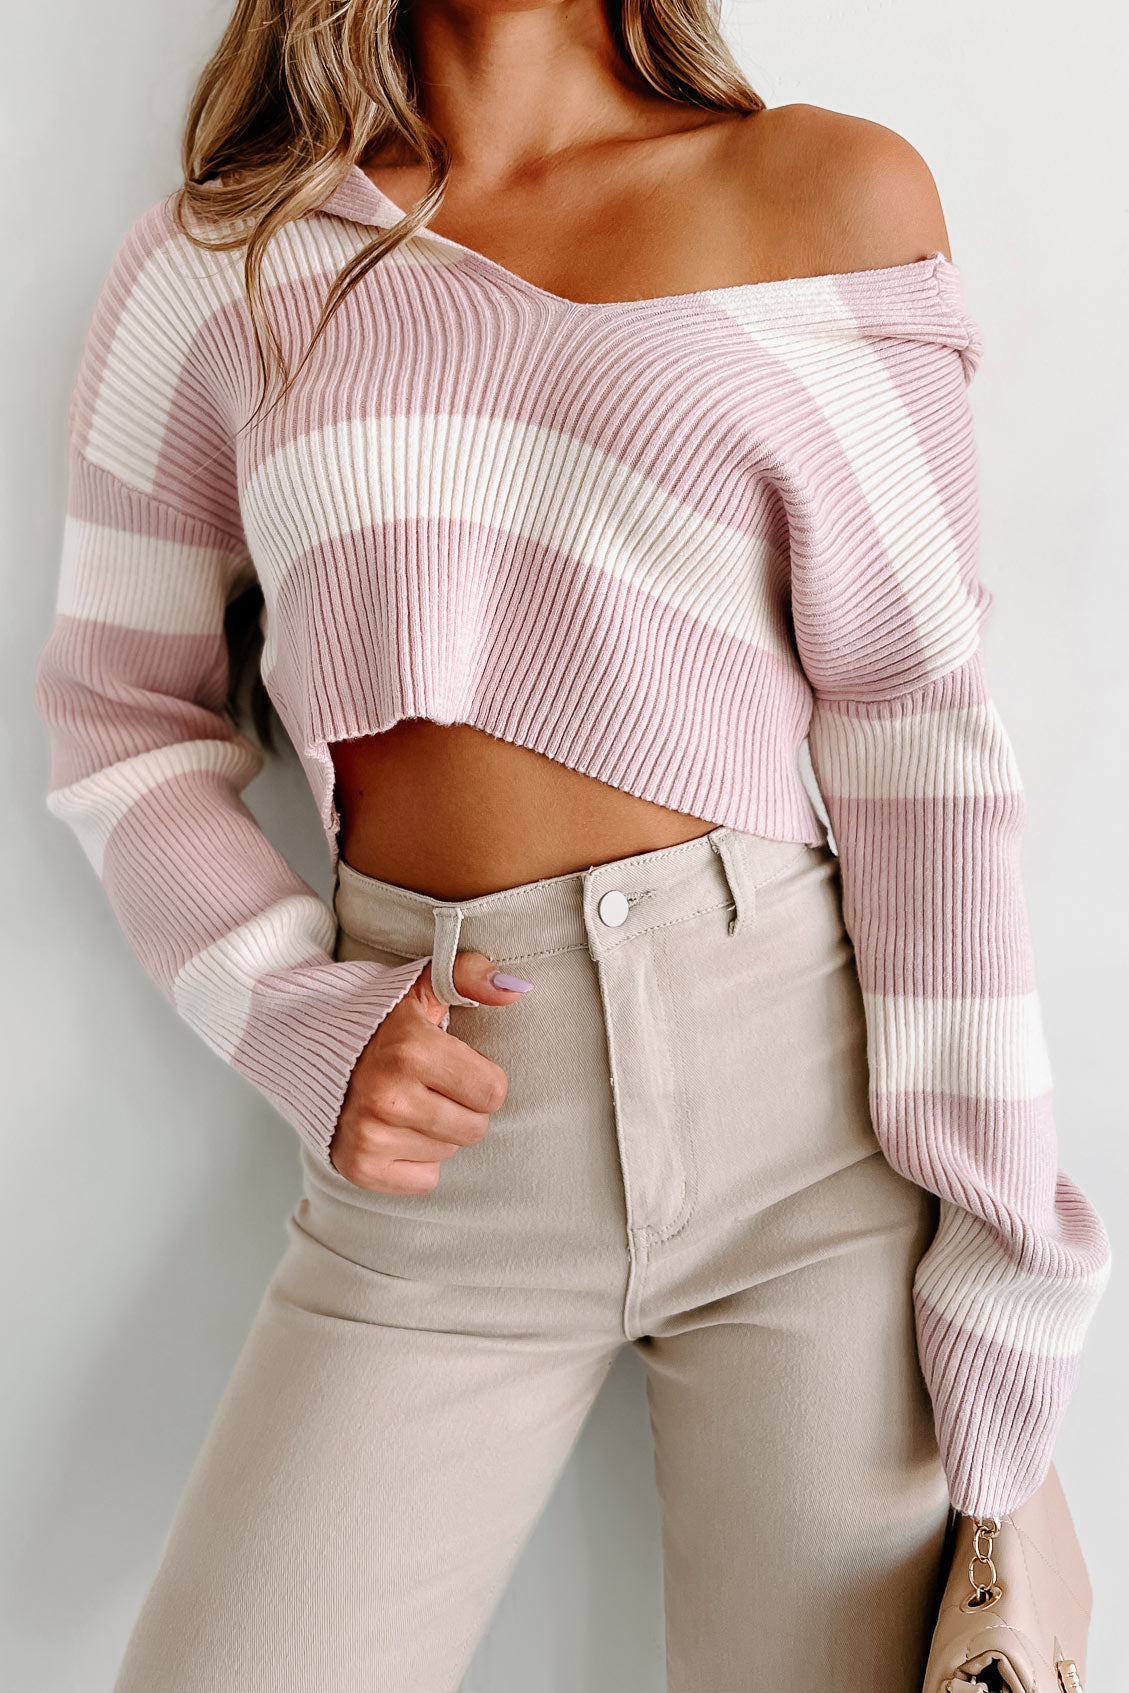 Easing Into Fall Hooded Striped Crop Sweater (Cream/Pink) - NanaMacs